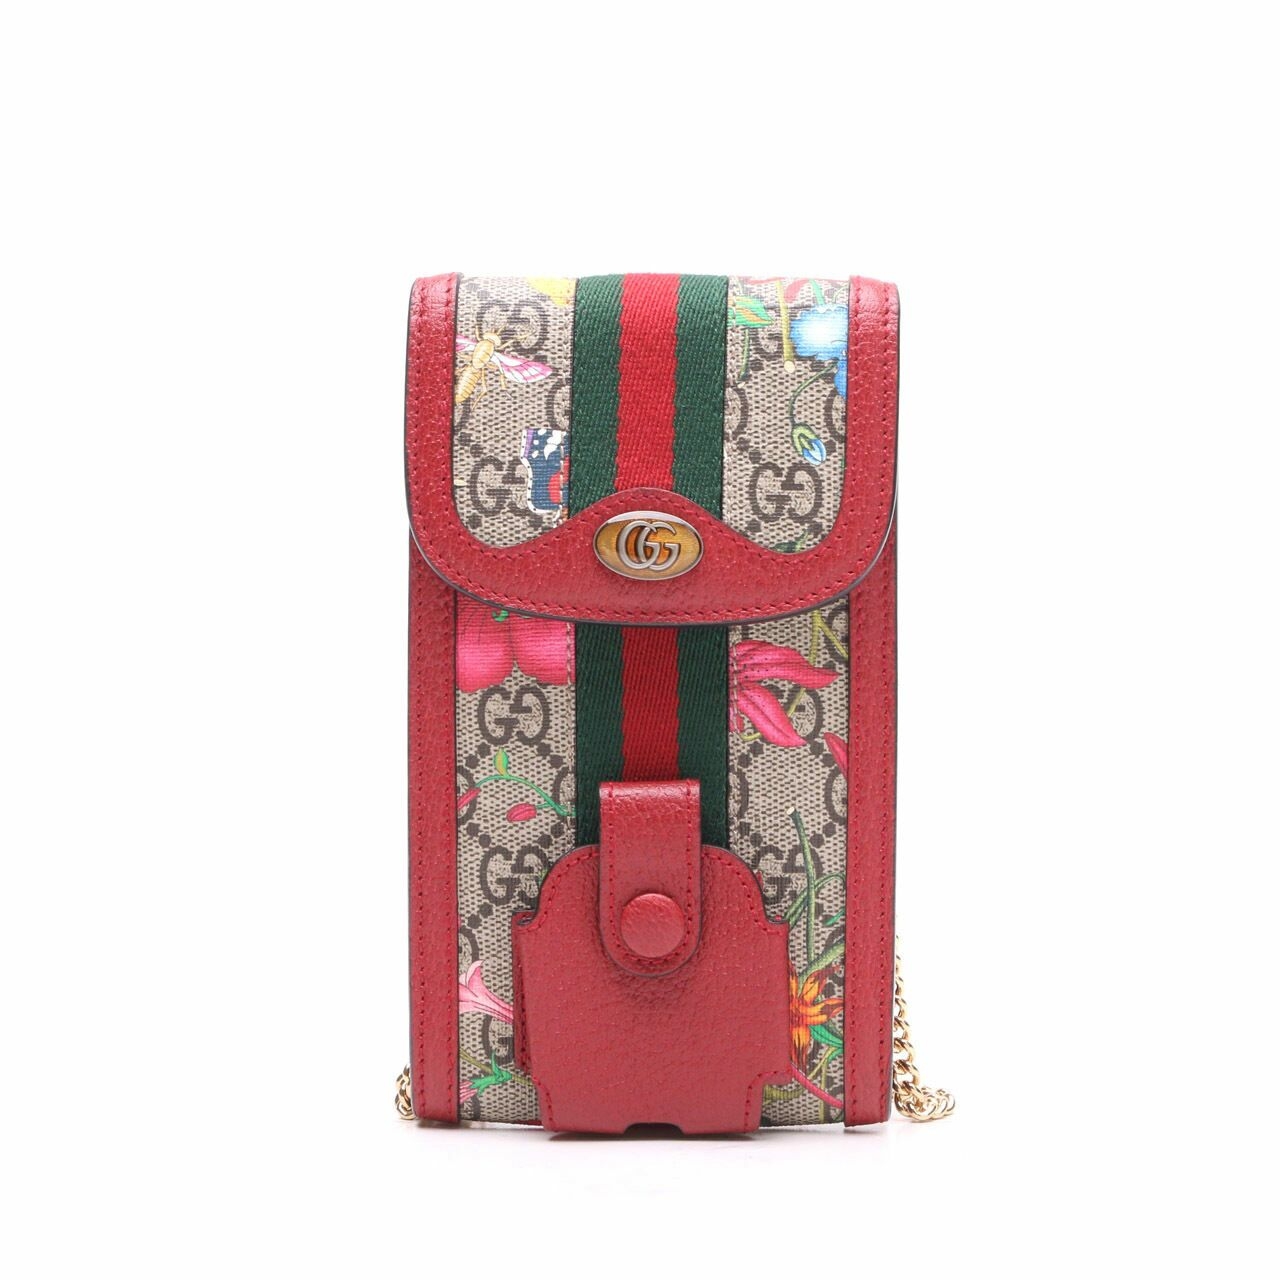 Gucci Red Floral GG Phone Case Sling Bag